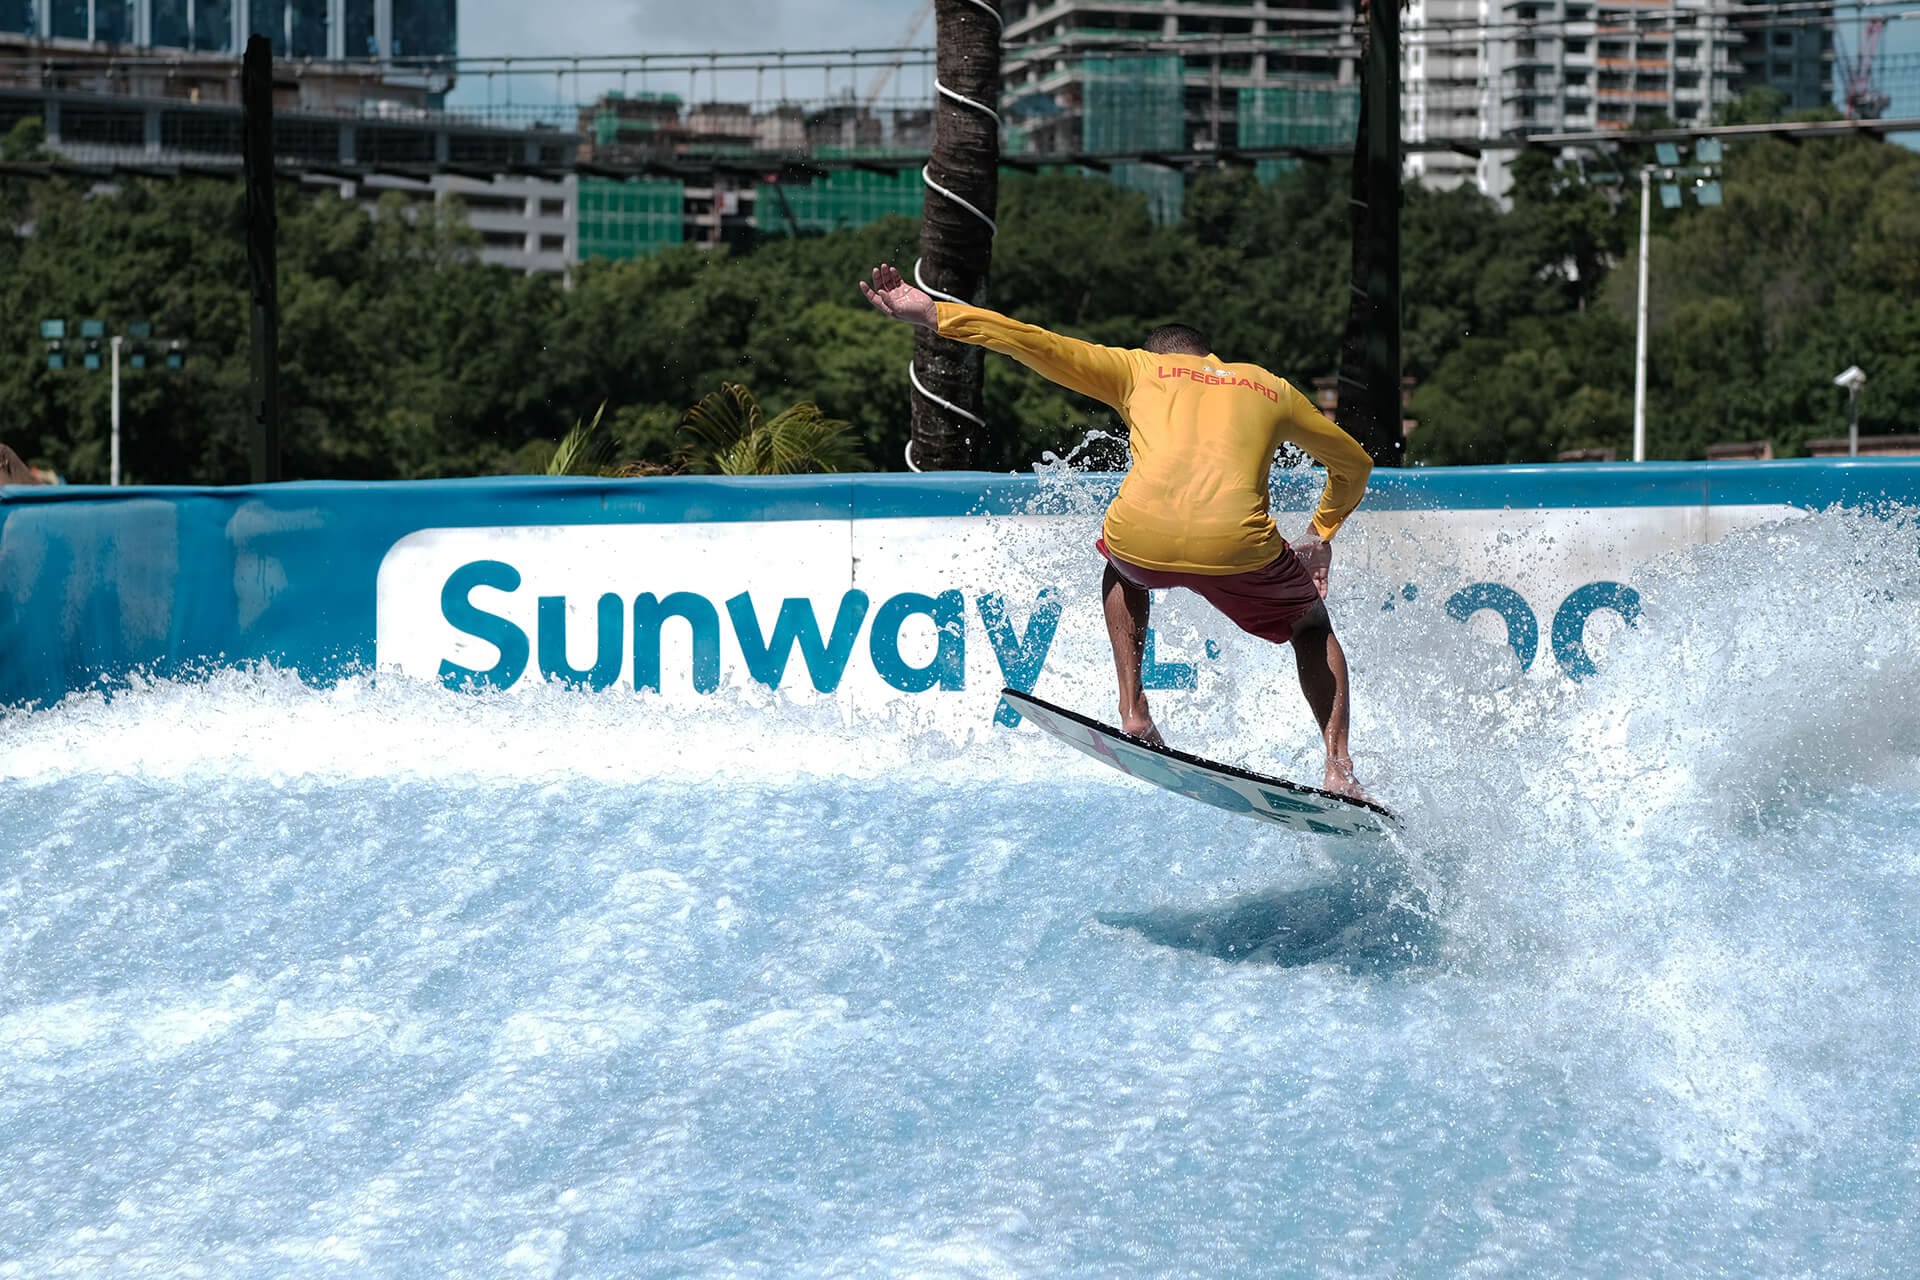 Have you heard of Malaysia’s first outdoor surfing simulator at Sunway Lagoon